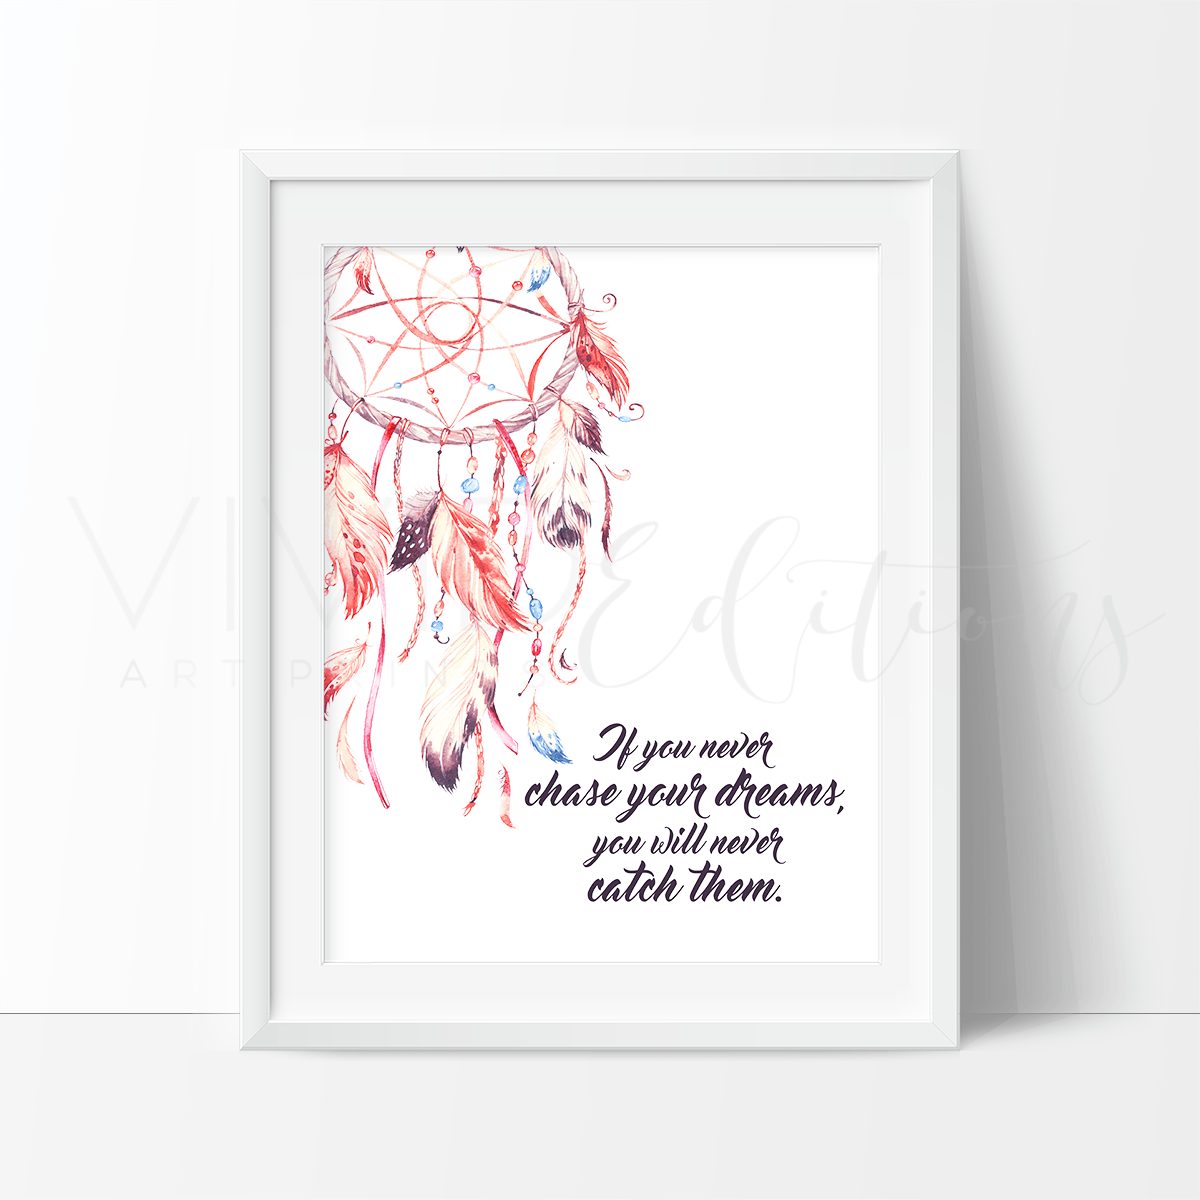 If You Never Chase Your Dreams..., Dreamcatcher Watercolor Art Print Print - VividEditions